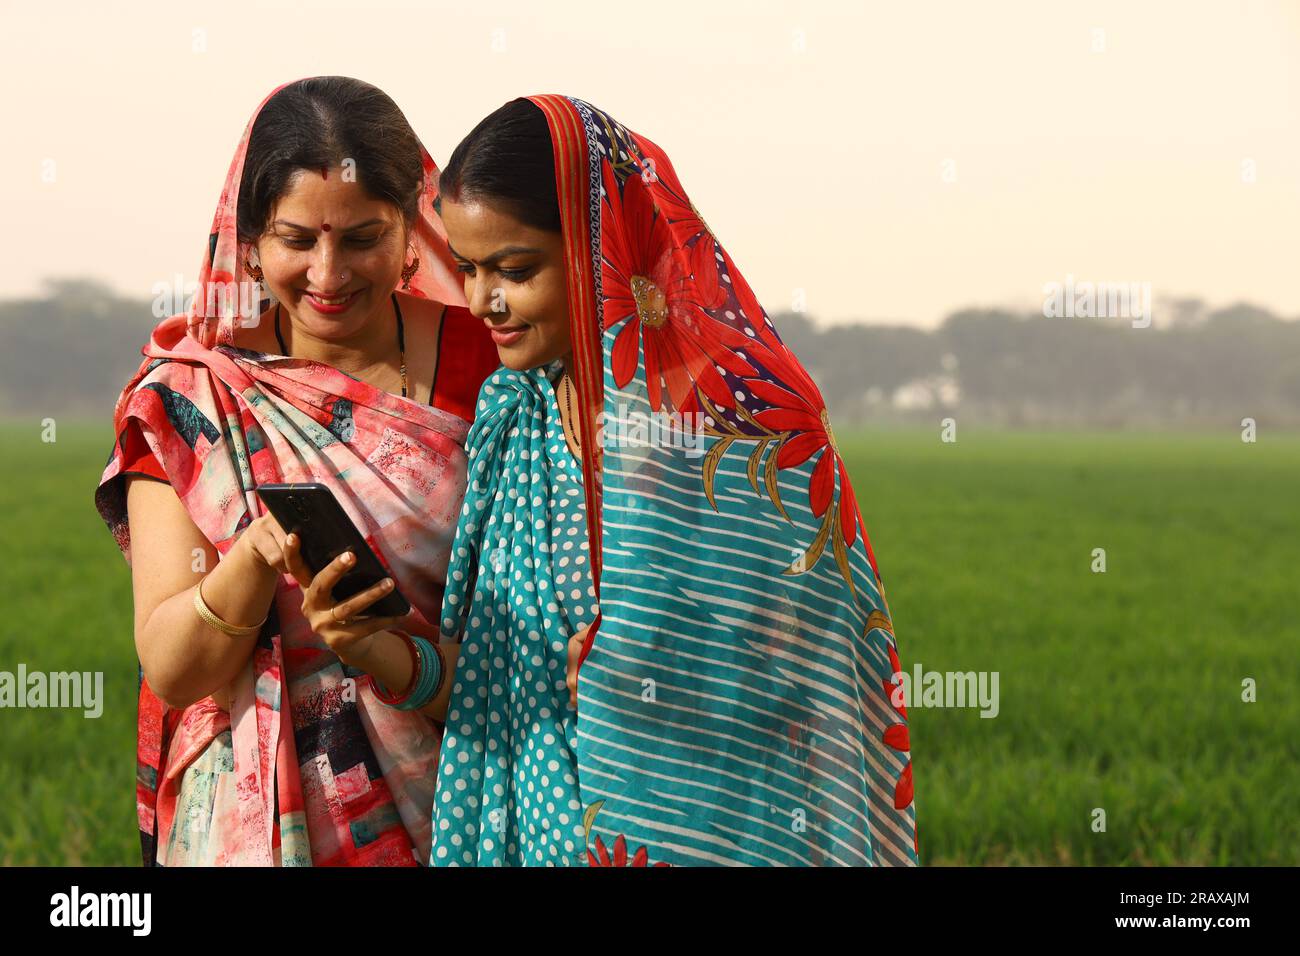 Happy rural Indian women standing in a mustard agricultural field and surfing through the mobile phone in their hand. Stock Photo